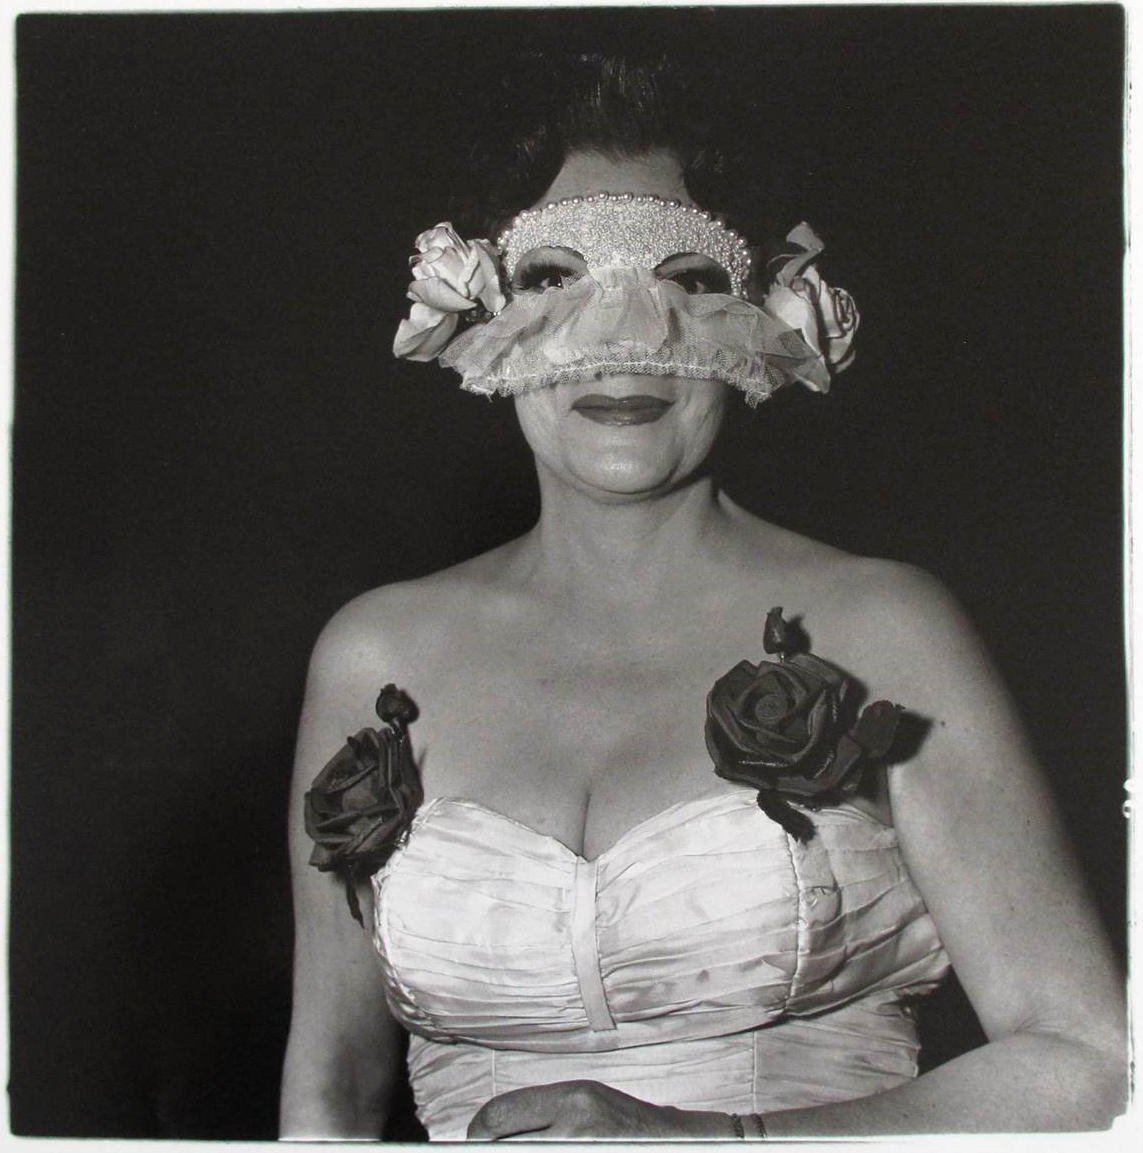 Lady at a Masked Ball with Two Roses on Her Dress, N.Y.C. ()1967) - Diane Arbus.jpg